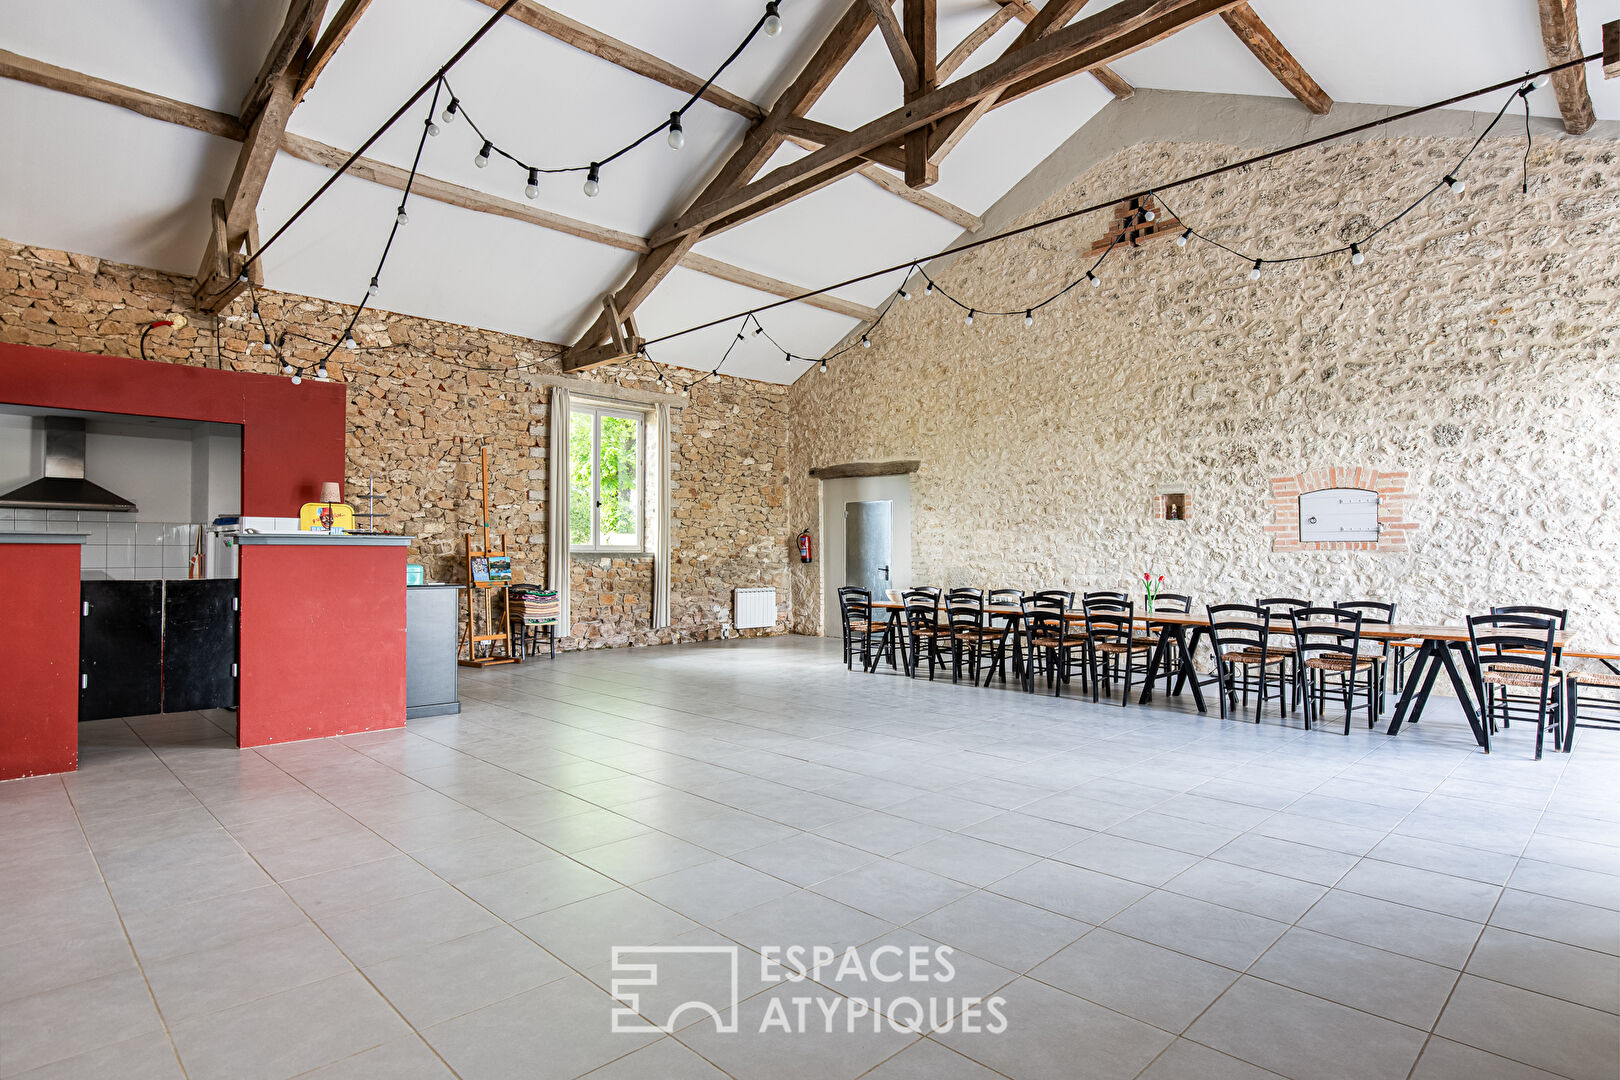 Character building with reception room and gîtes in the Gaillac countryside